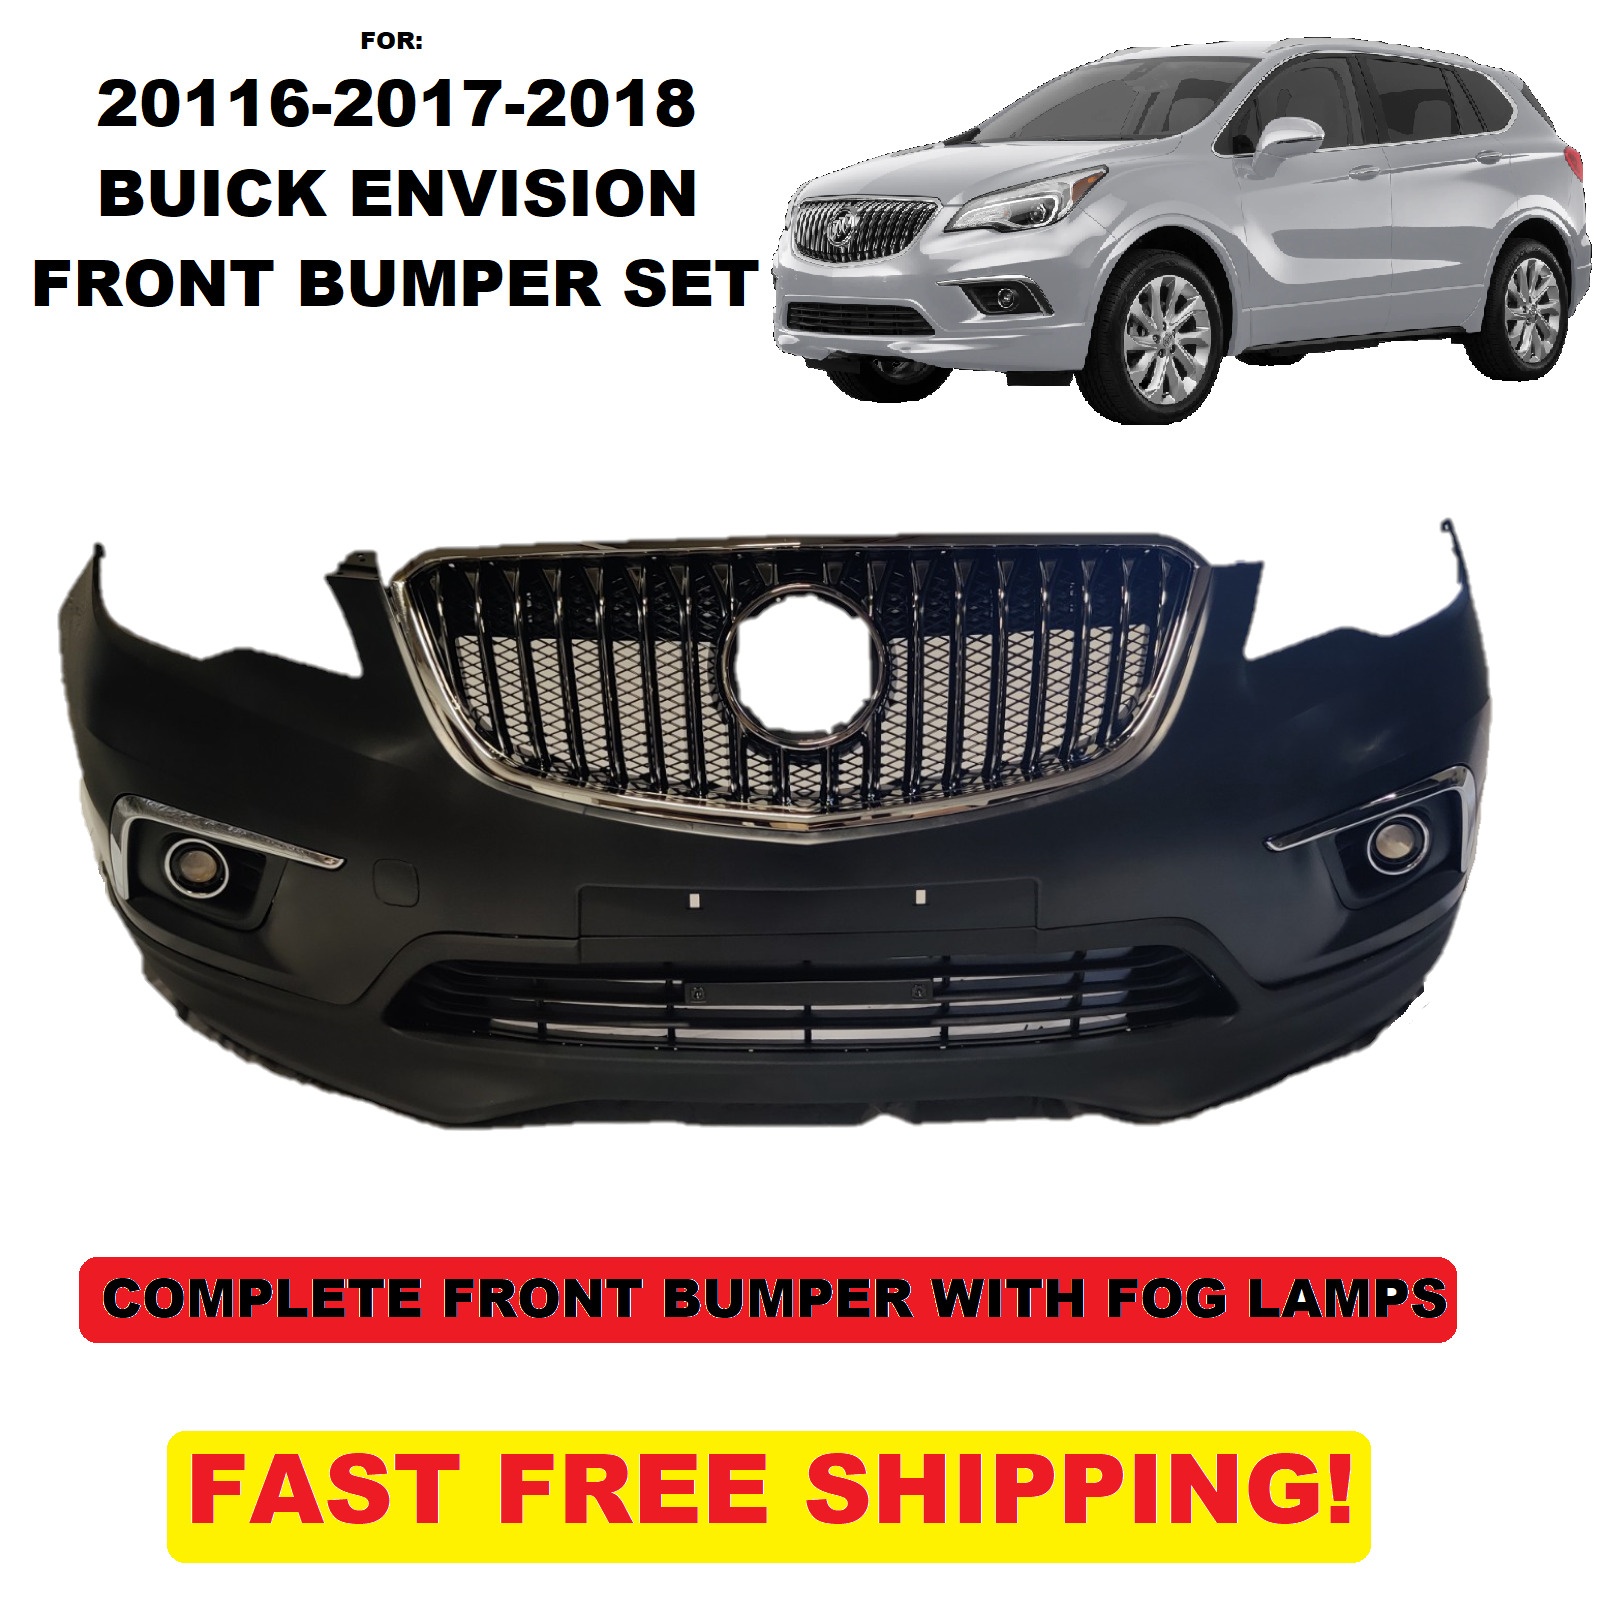 FOR 2016 2017 2018 Buick envision front bumper SET WITH FOG LAMPS & GRILLS